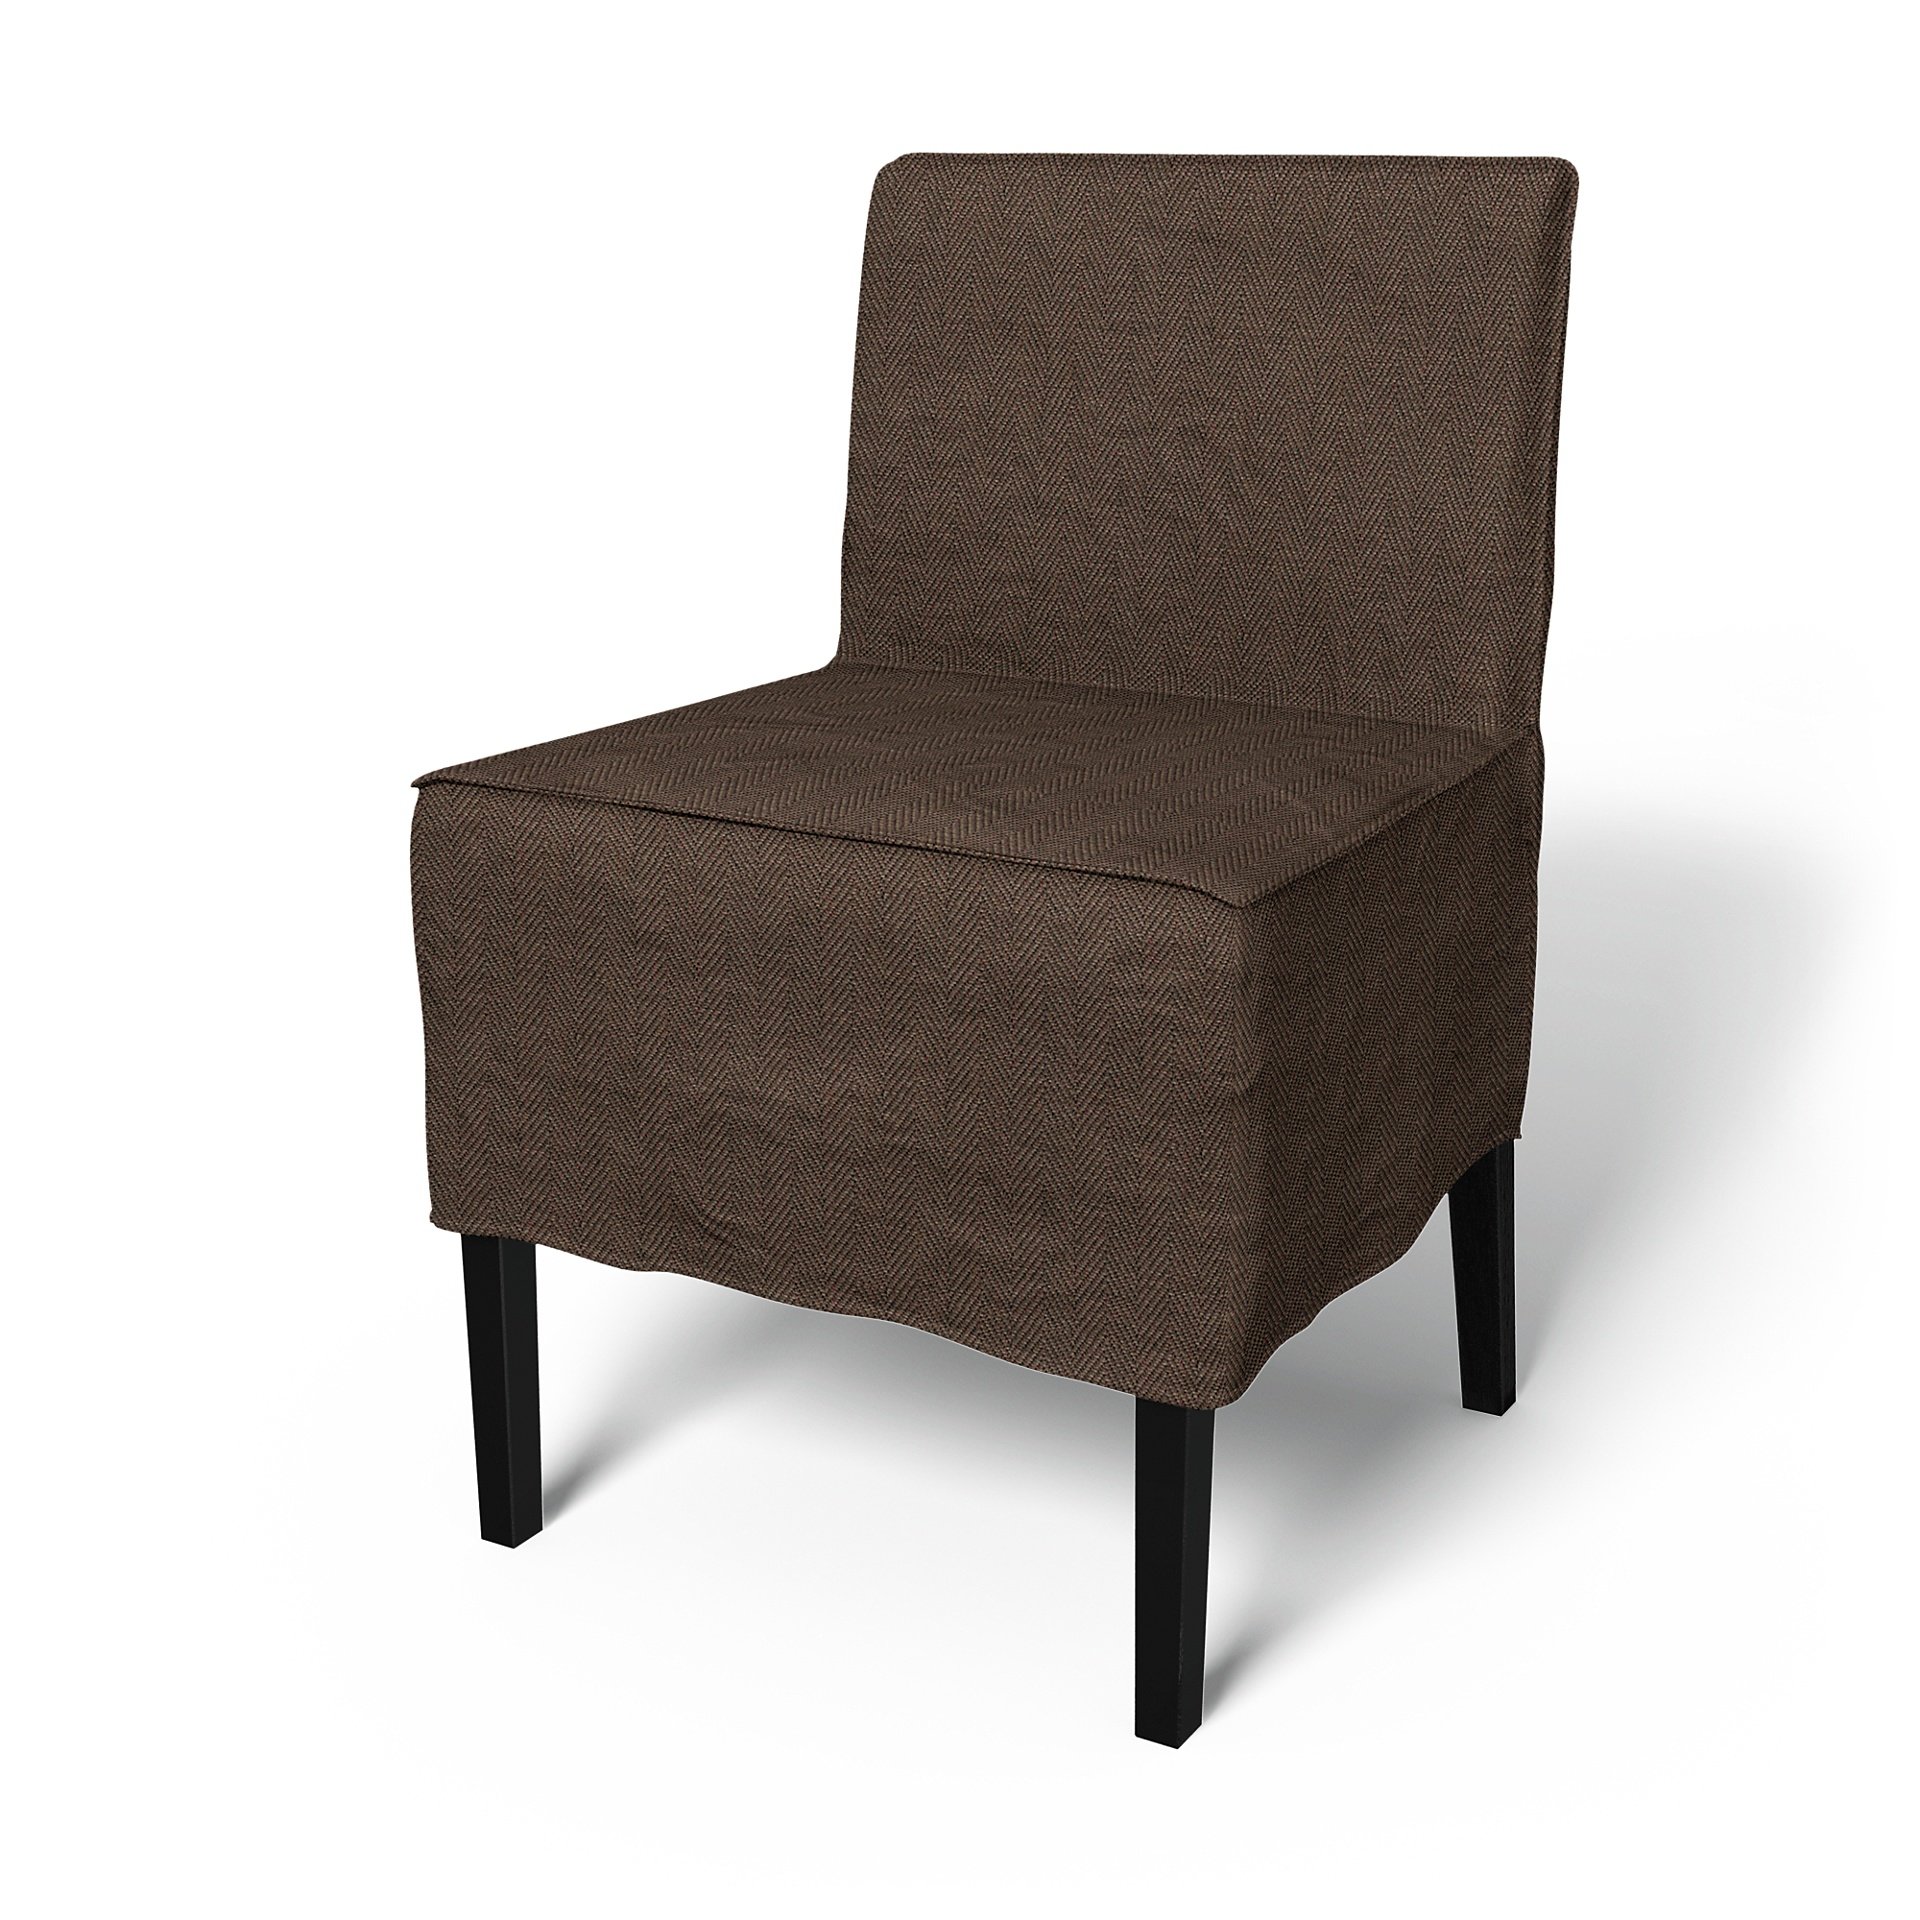 IKEA - Nils Dining Chair Cover, Chocolate, Boucle & Texture - Bemz